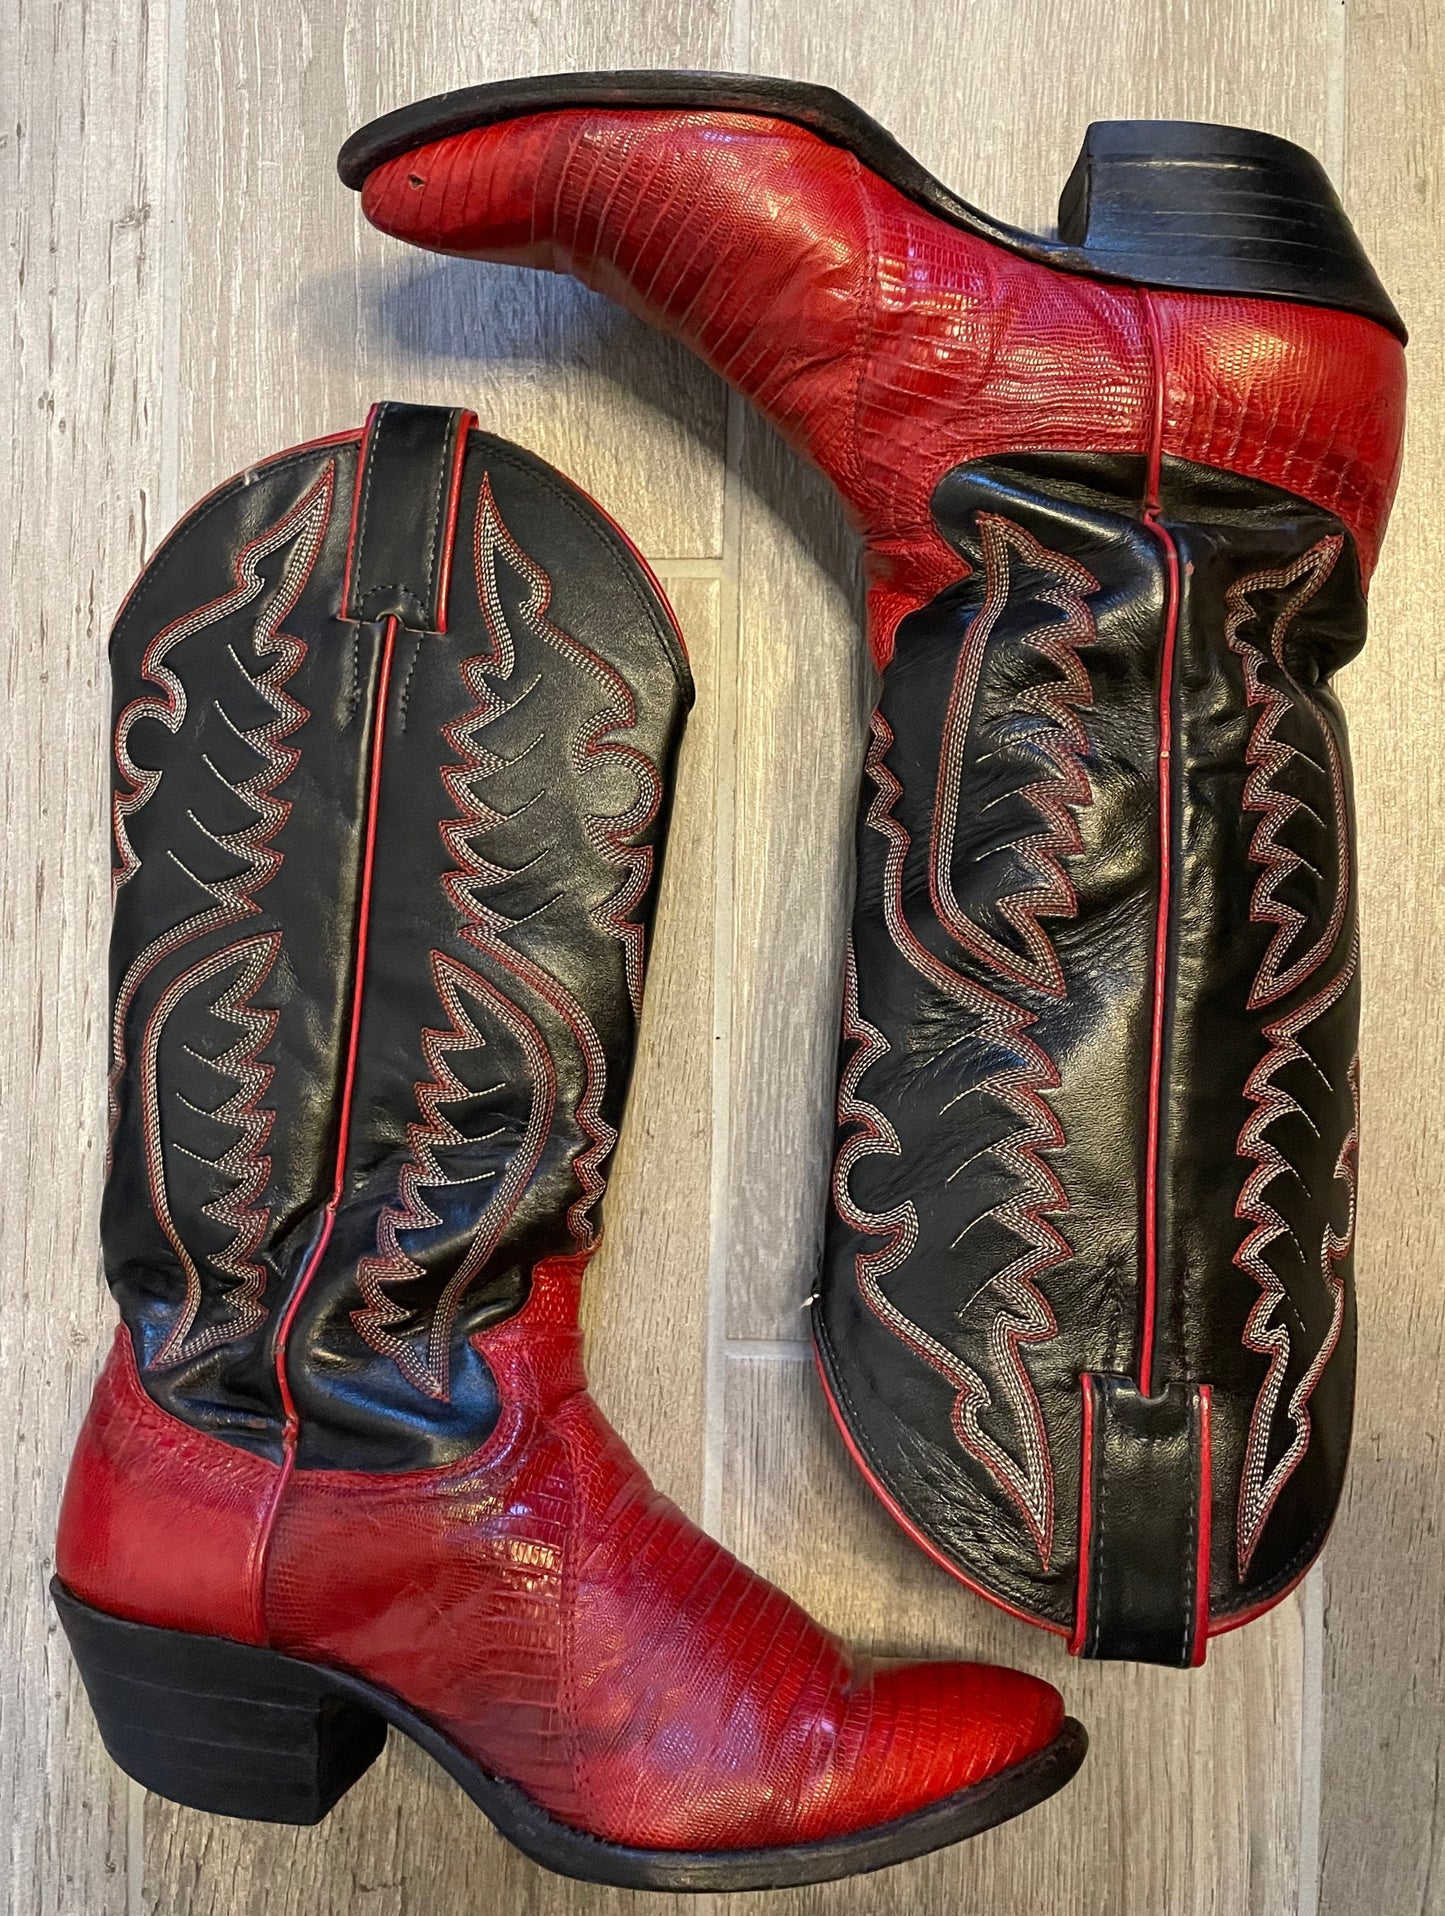 Vintage Tony Lama Black & Red Cowgirl Boots